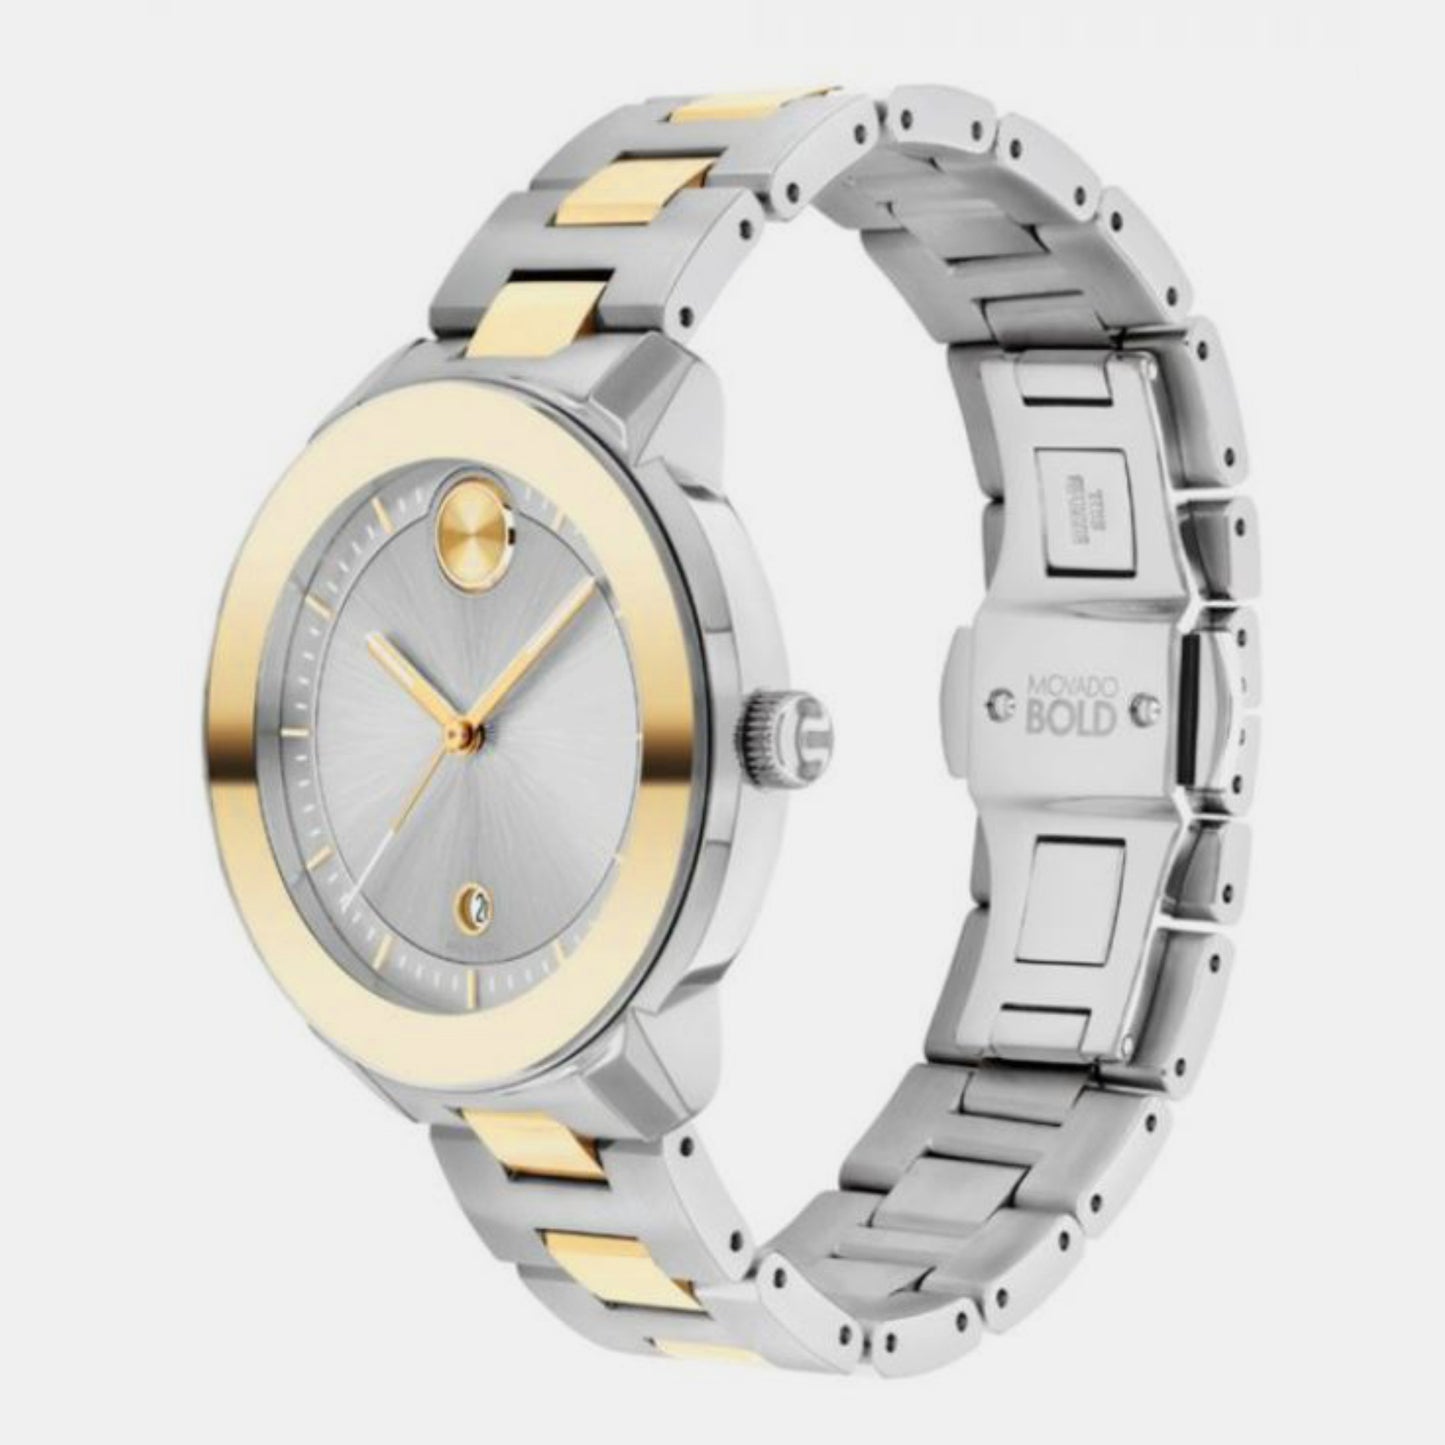 Bold Female Male Silver Analog Stainless Steel Watch 3600749